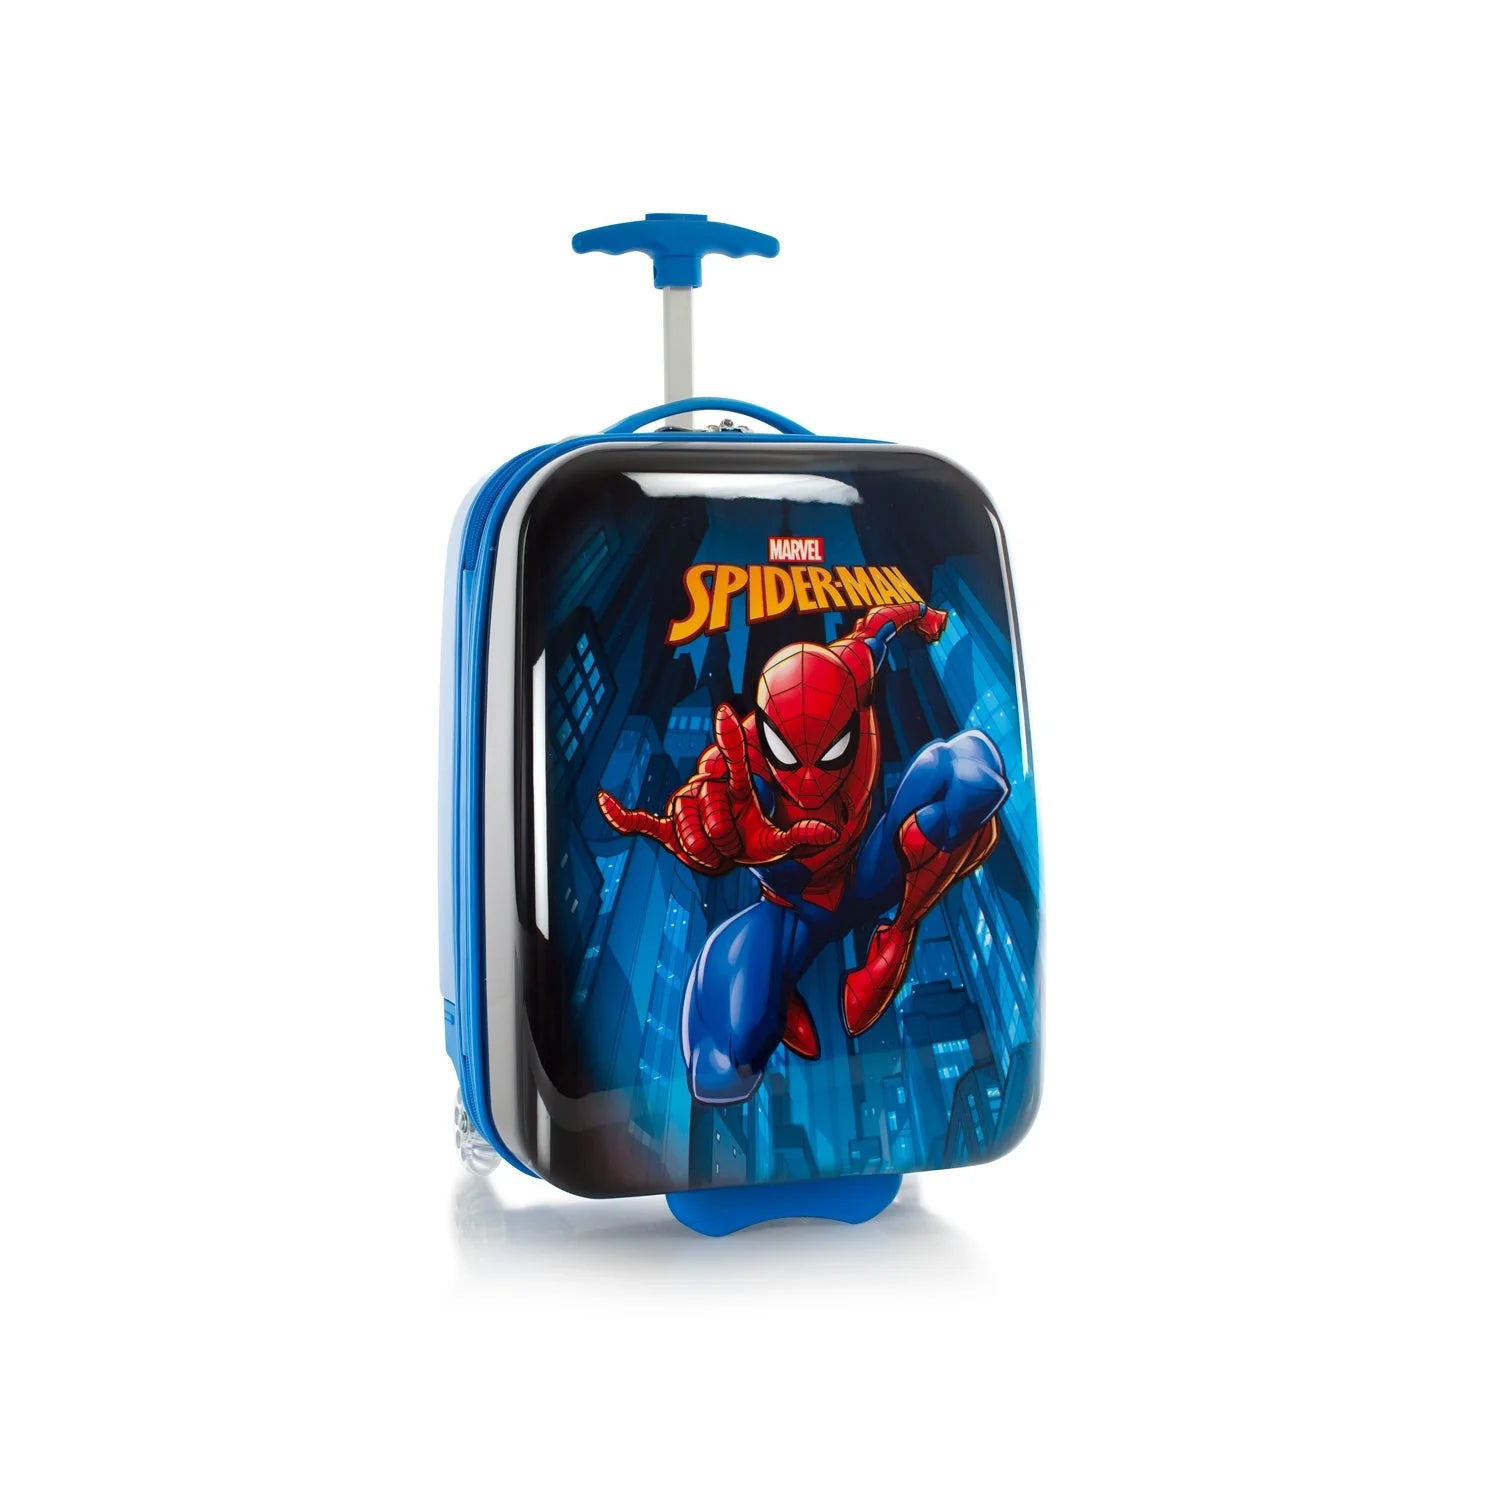 Spider-Man Kids Luggage - Square - Two Wheels - Hardcase - Polycarbonate